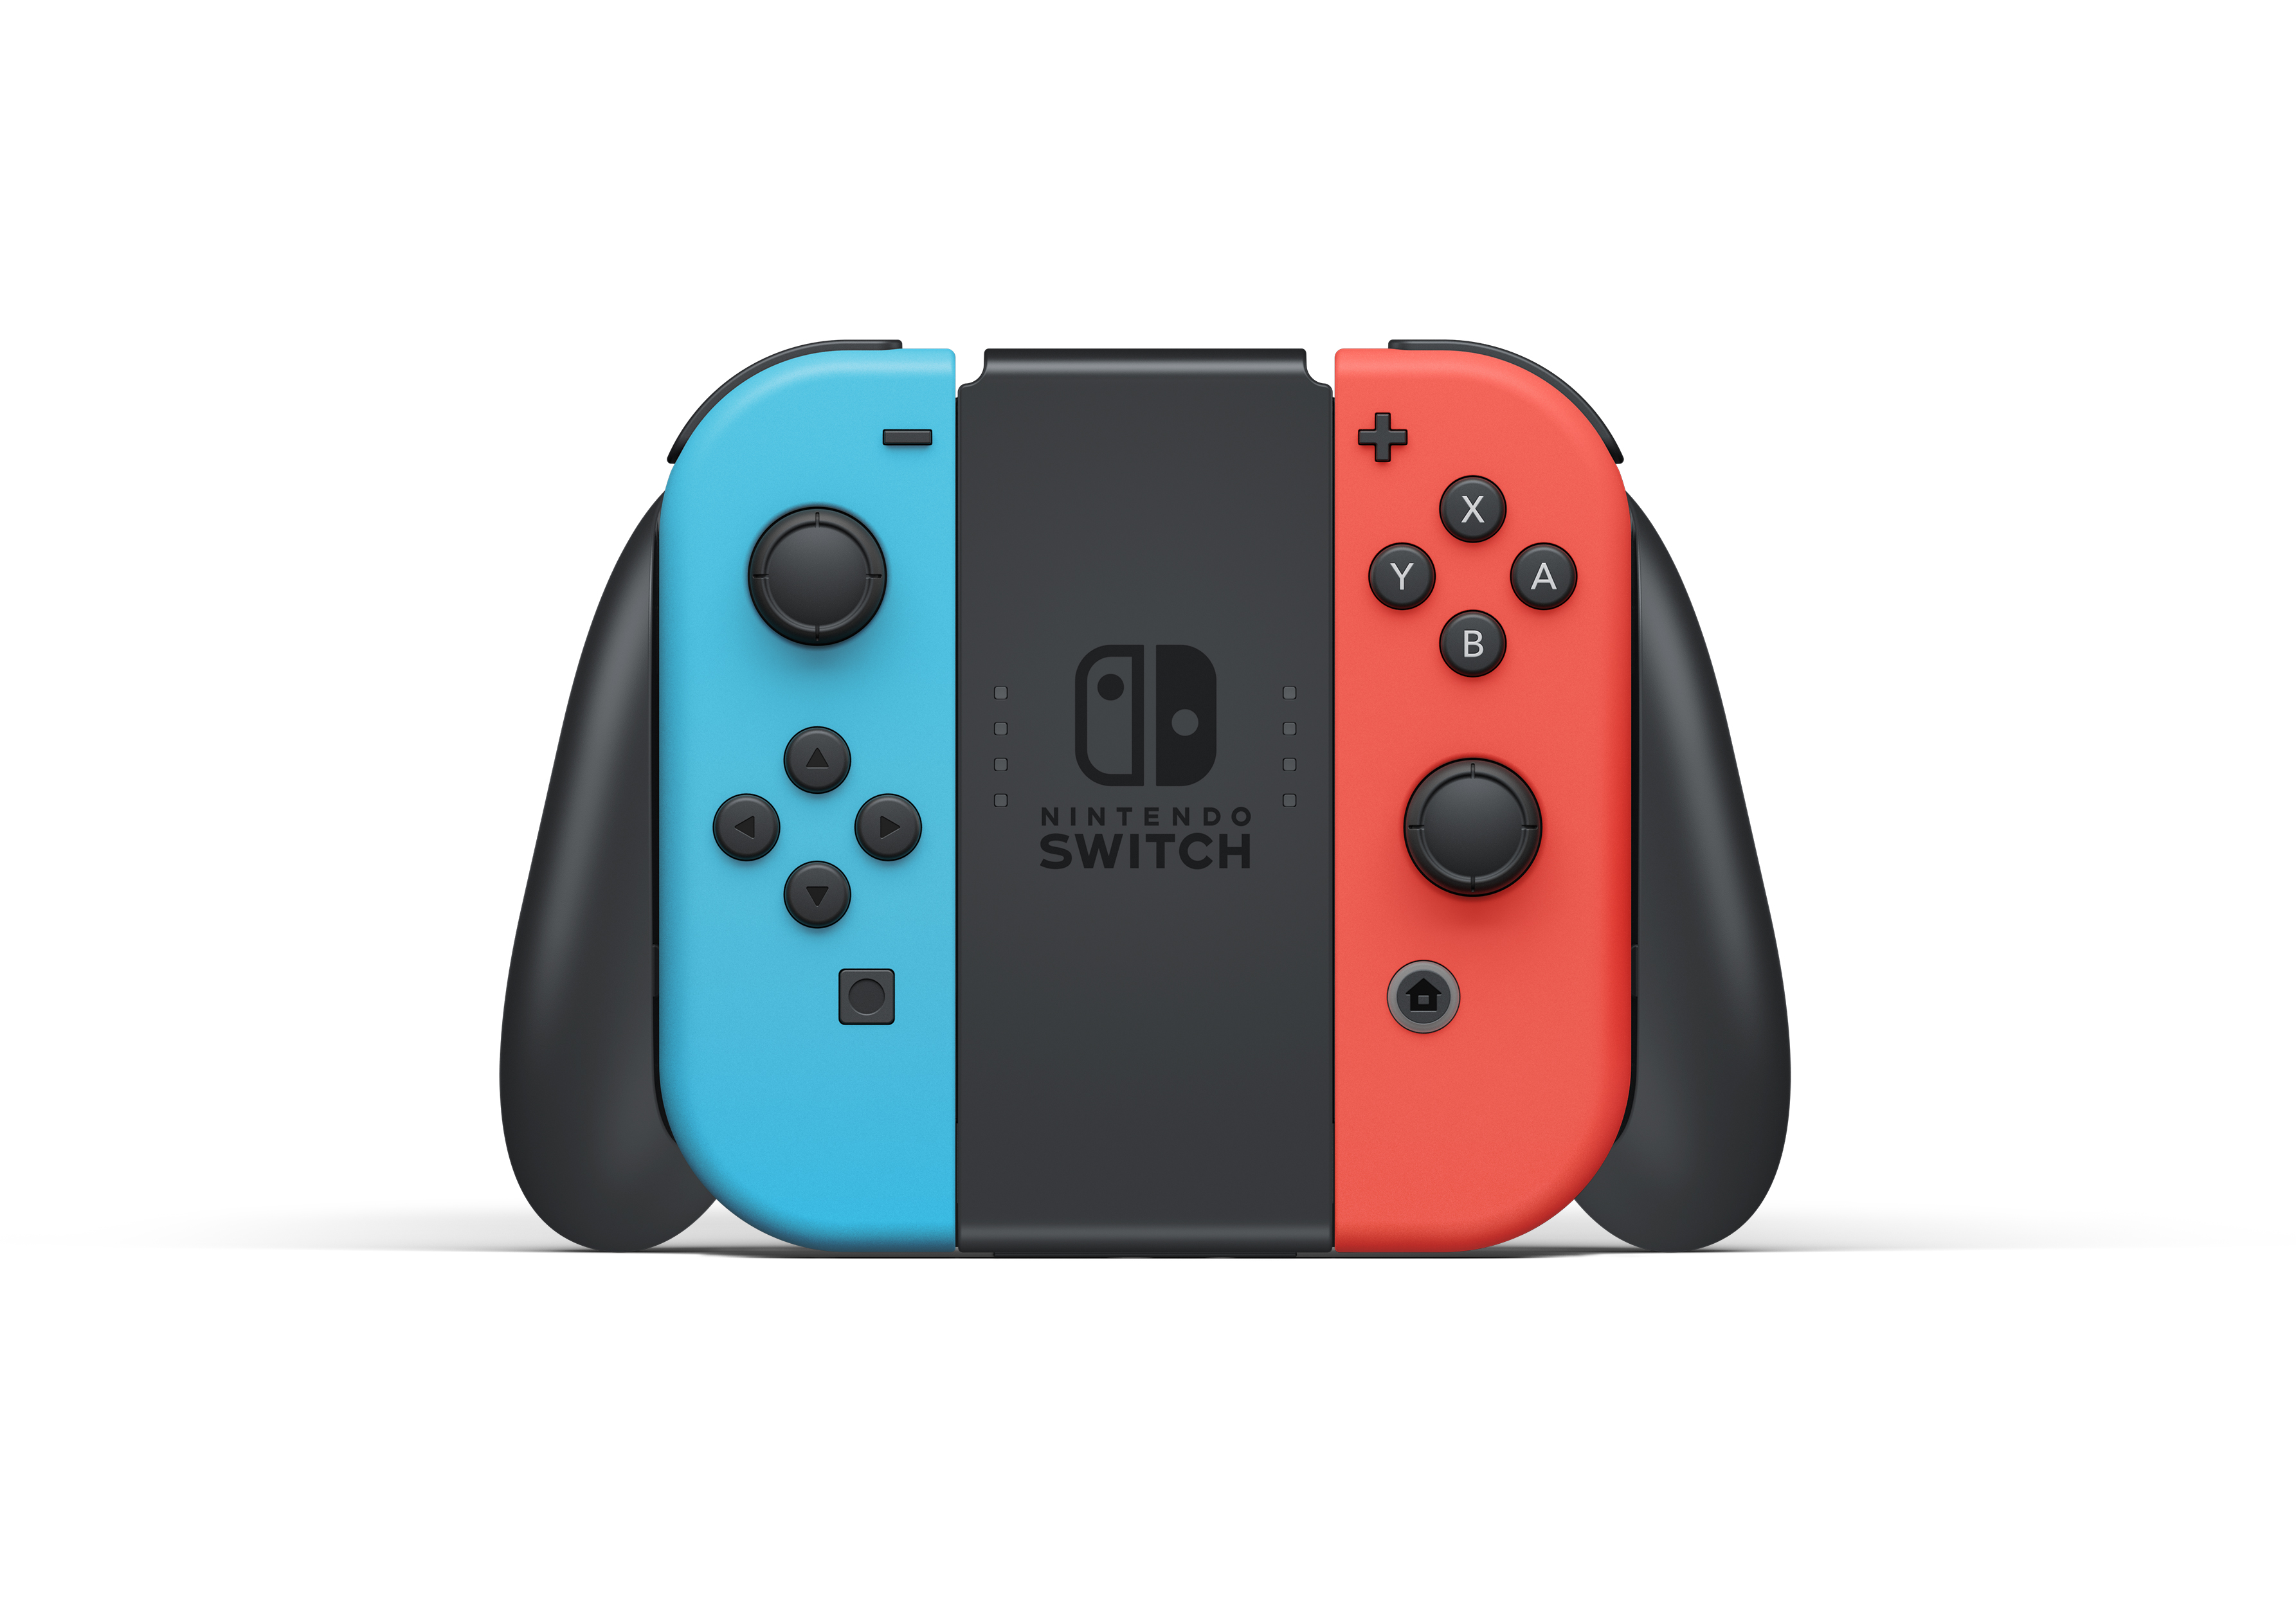 Nintendo - Switch v2 (updated battery) 32GB Console - Neon Red/Neon Blue Joy-Con